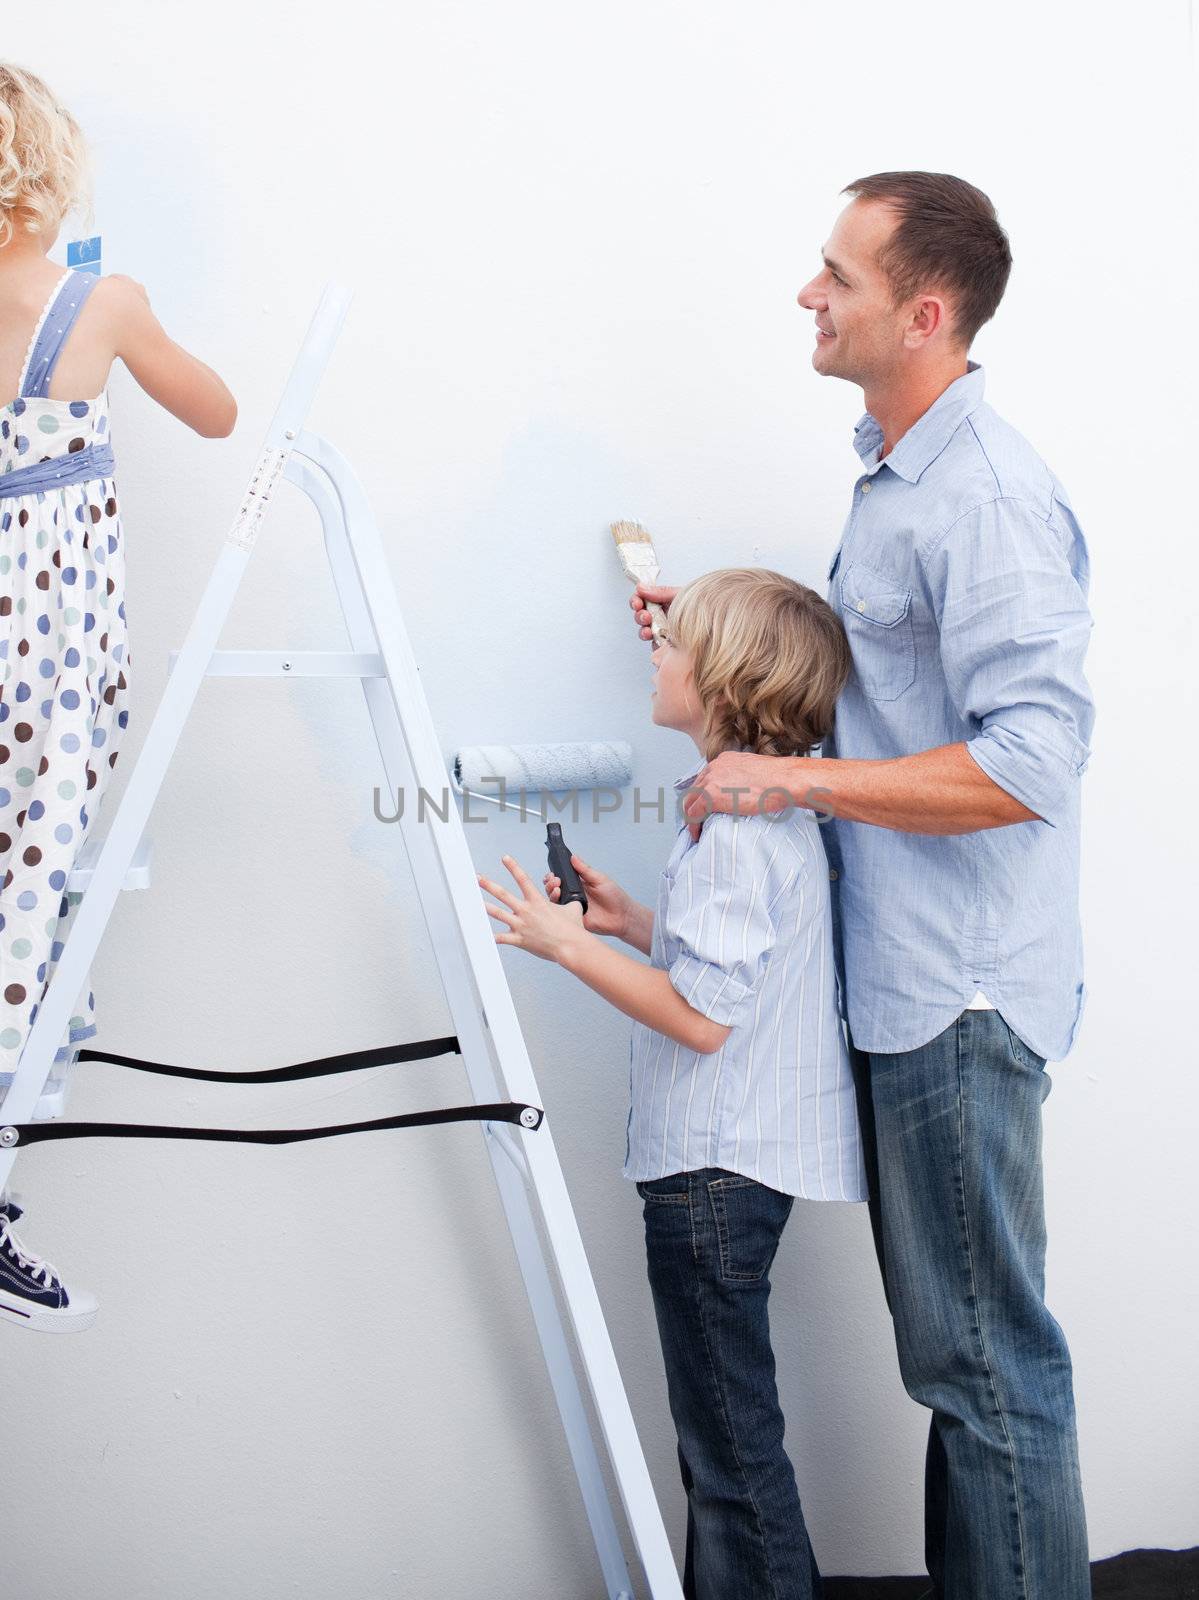 Children and parents preparing a new decoration  by Wavebreakmedia